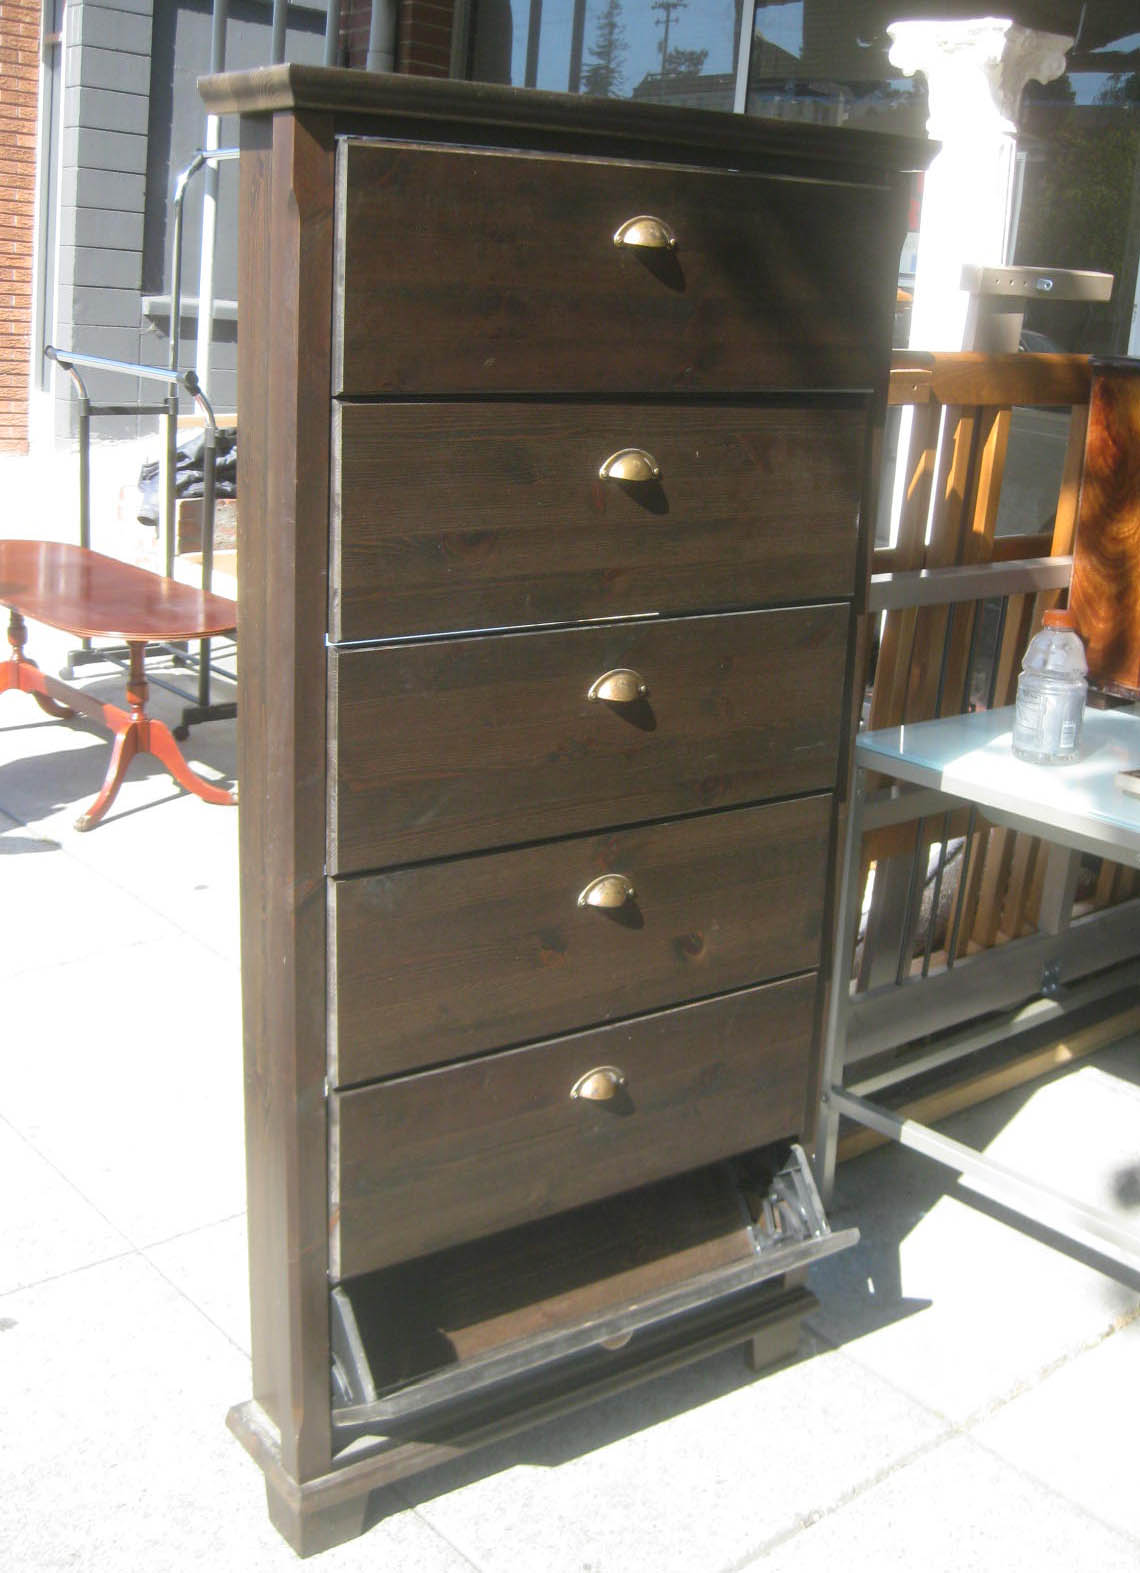 UHURU FURNITURE & COLLECTIBLES: SOLD - CD Cabinet - $30